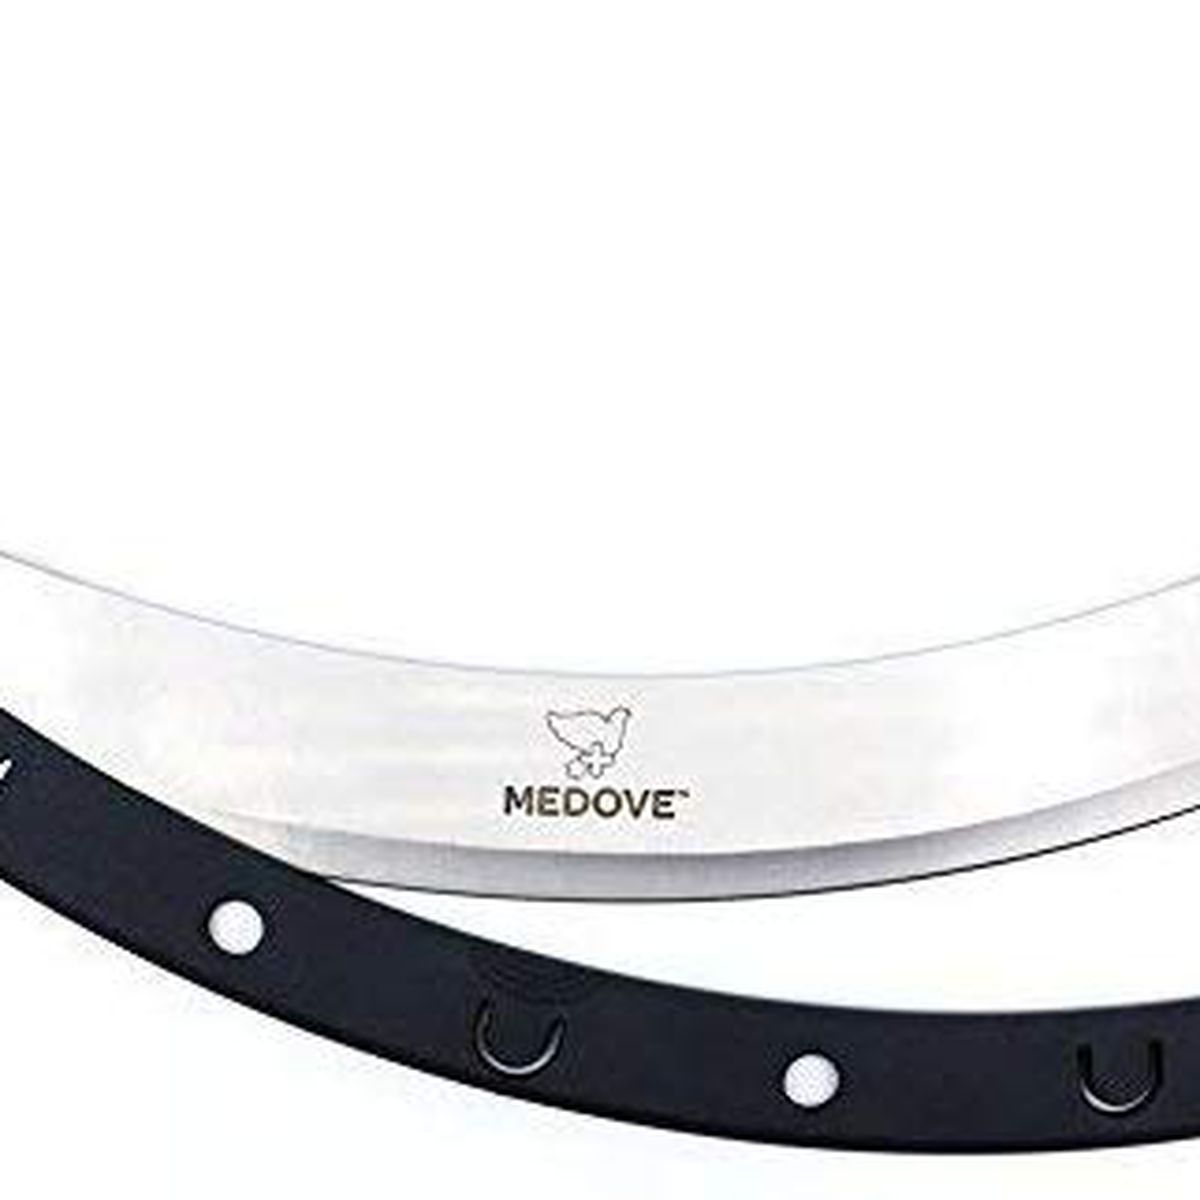 A rocker blade pizza cutter with stainless steel handles and a black blade cover